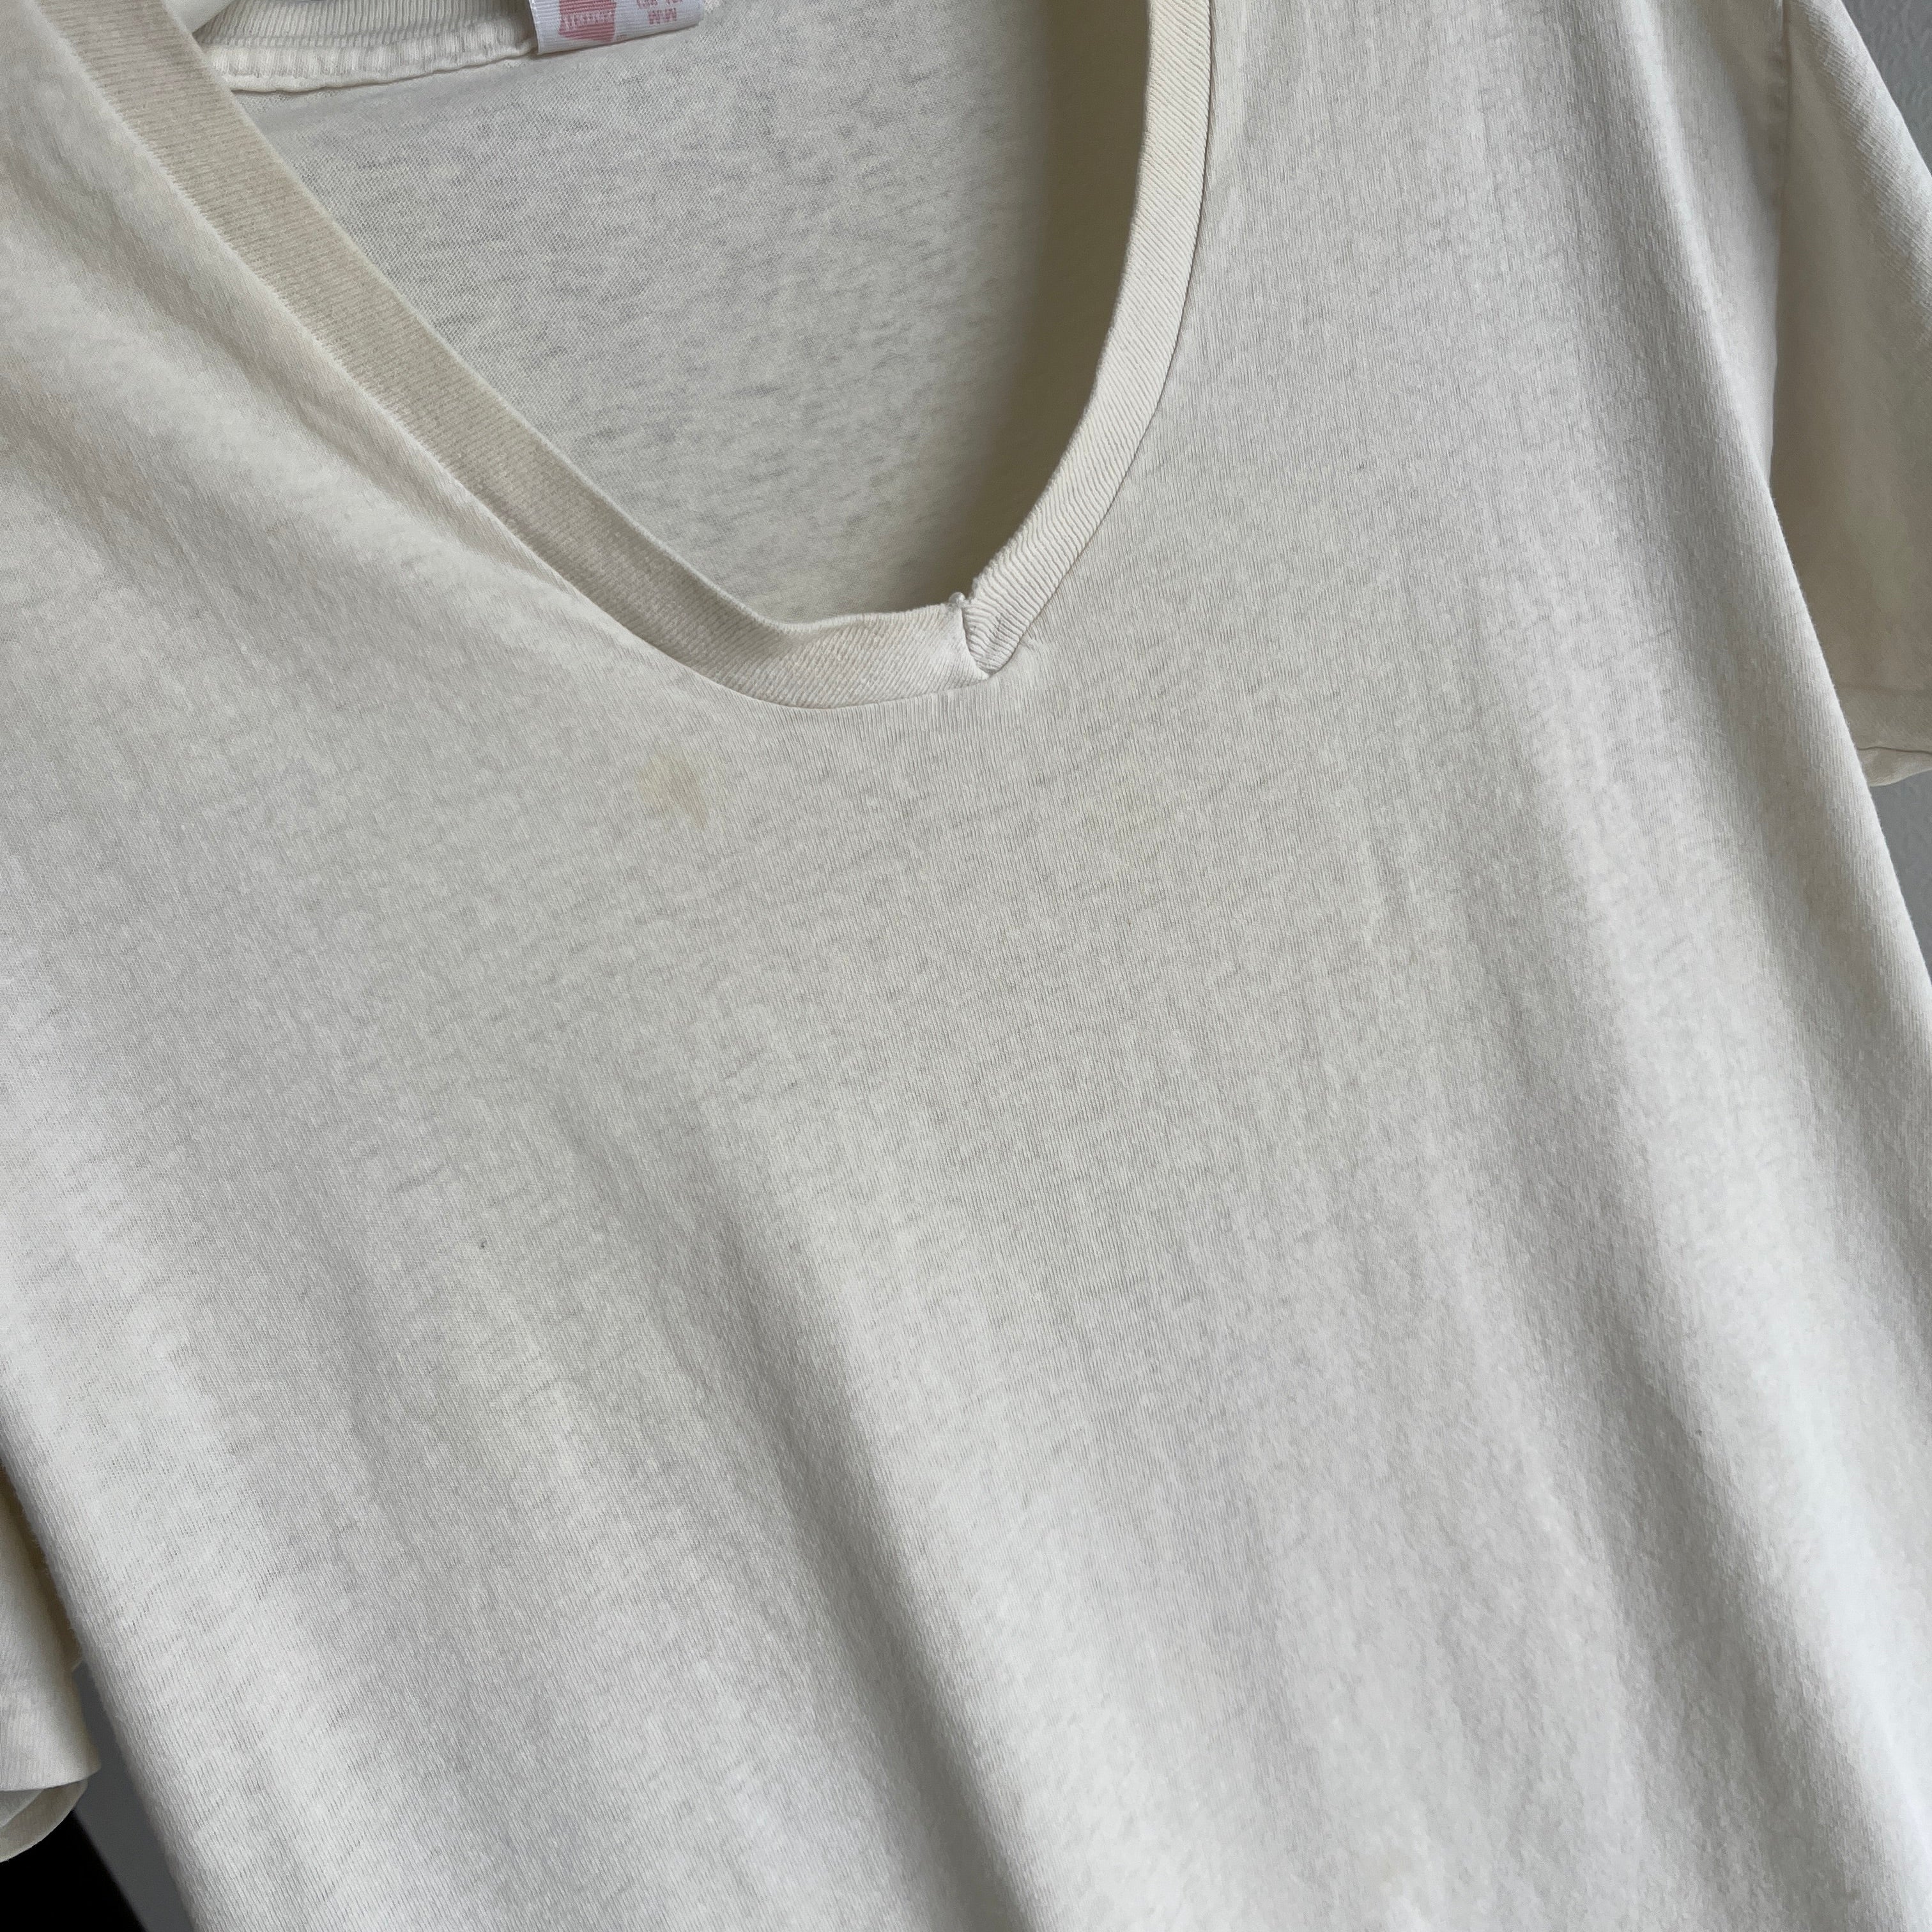 2000s Not That Old But Very Nicely Trashed Ecru (Used to be White) V-Neck Thinned Out T-Shirt